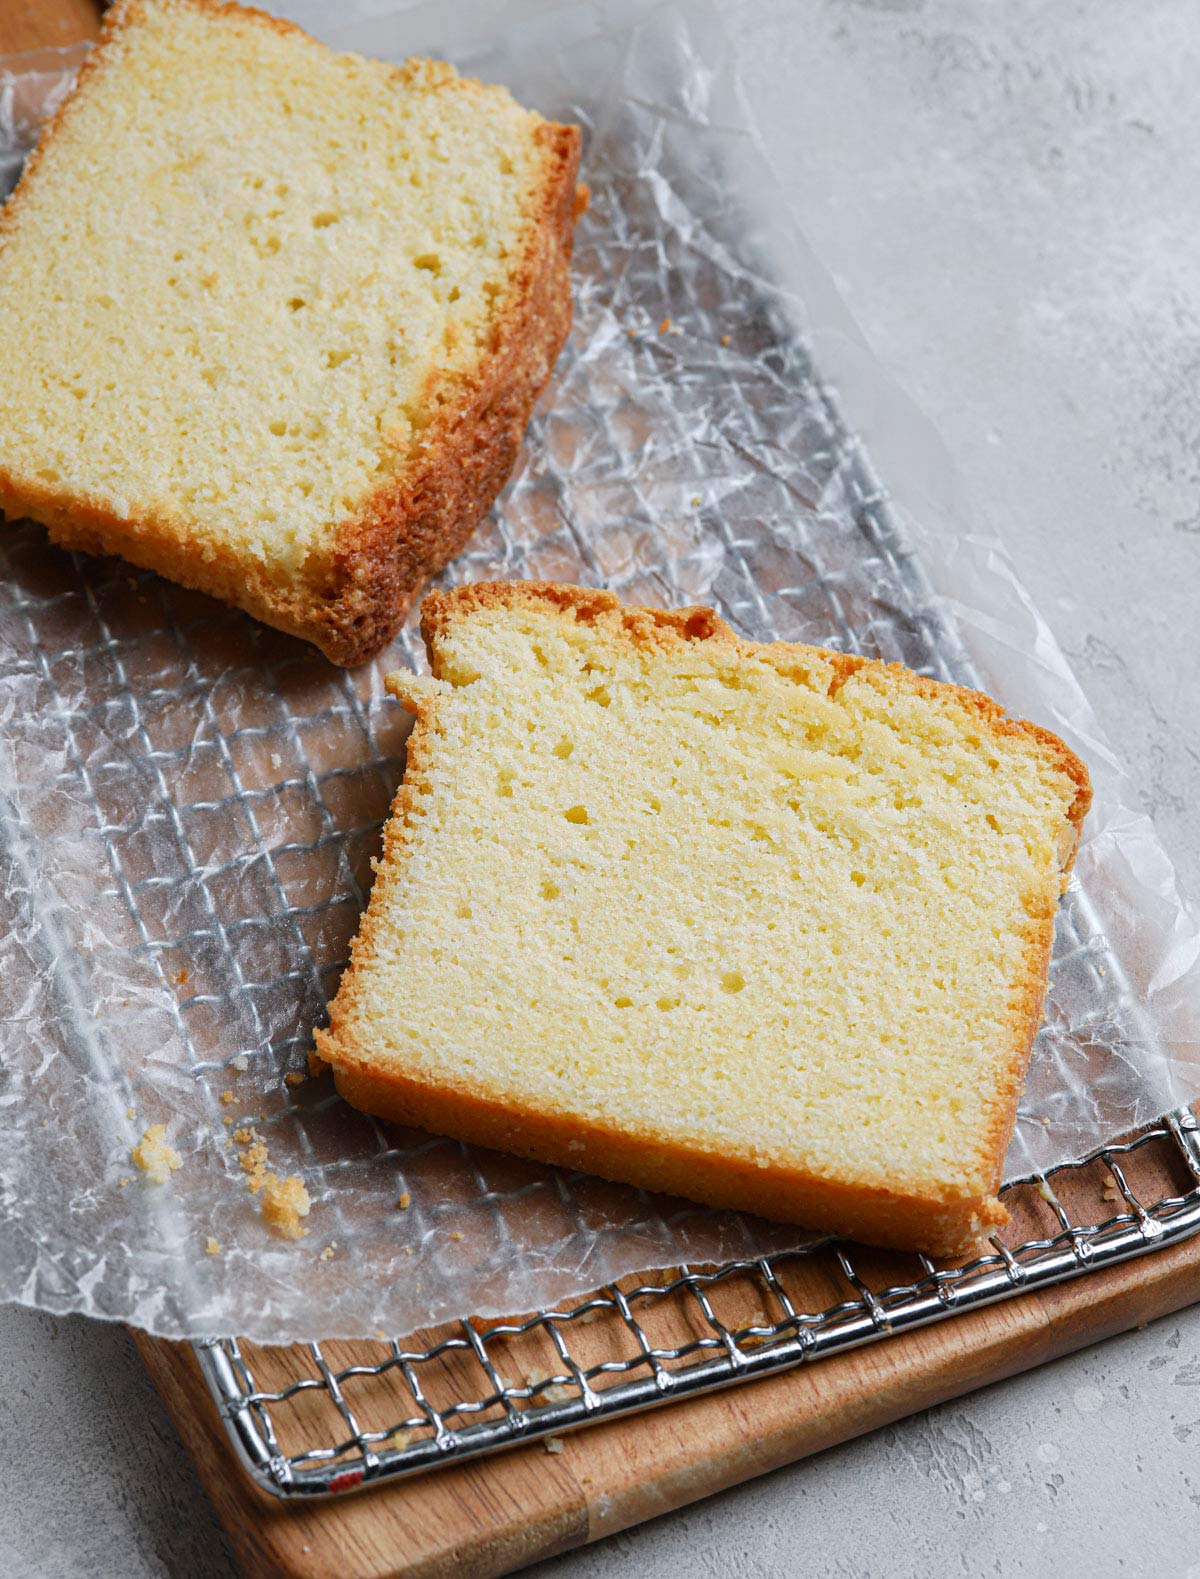 Slices of pound cake on a wax paper-lined cooling rack.